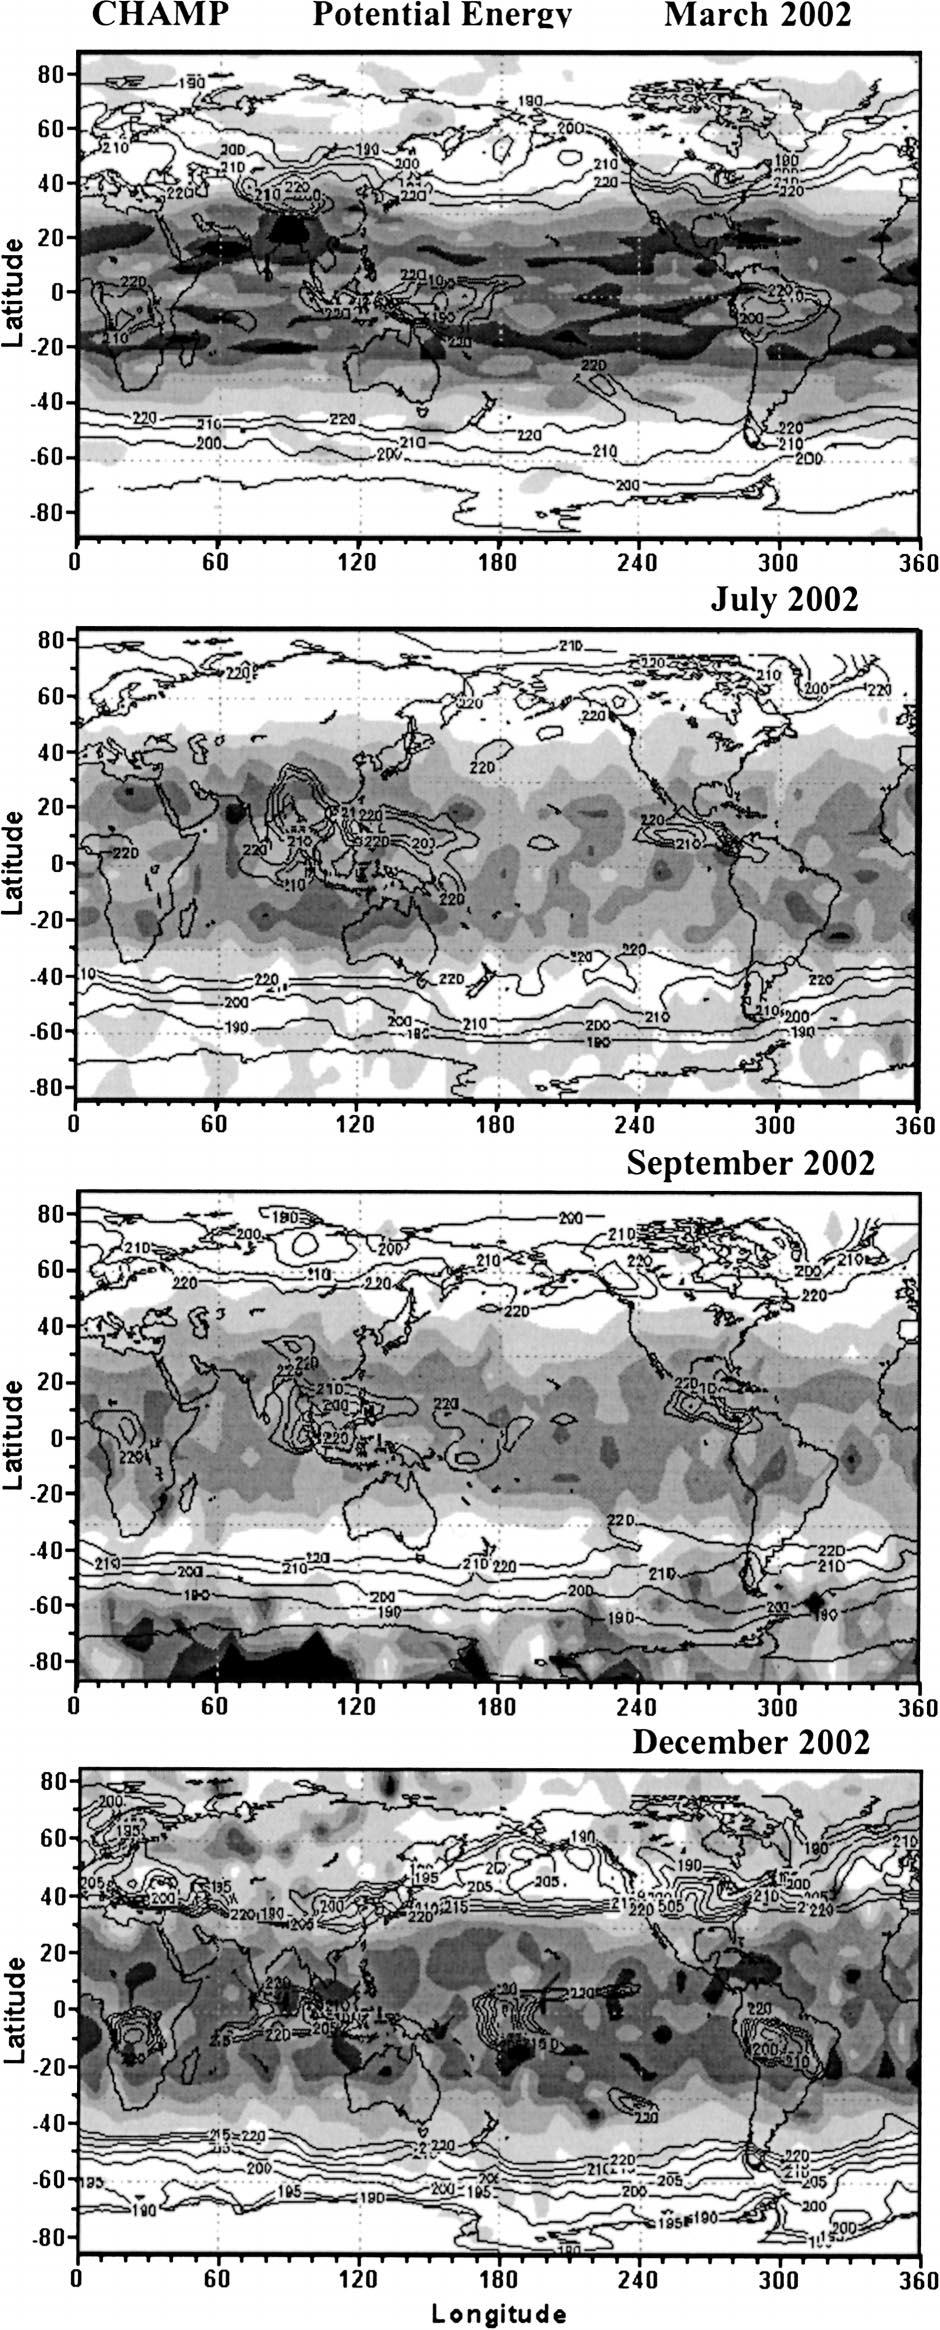 However, this later feature is not clearly observed during March 2002, which reveals that the large E p values observed over the midlatitude continents are either not due to mountain/lee waves